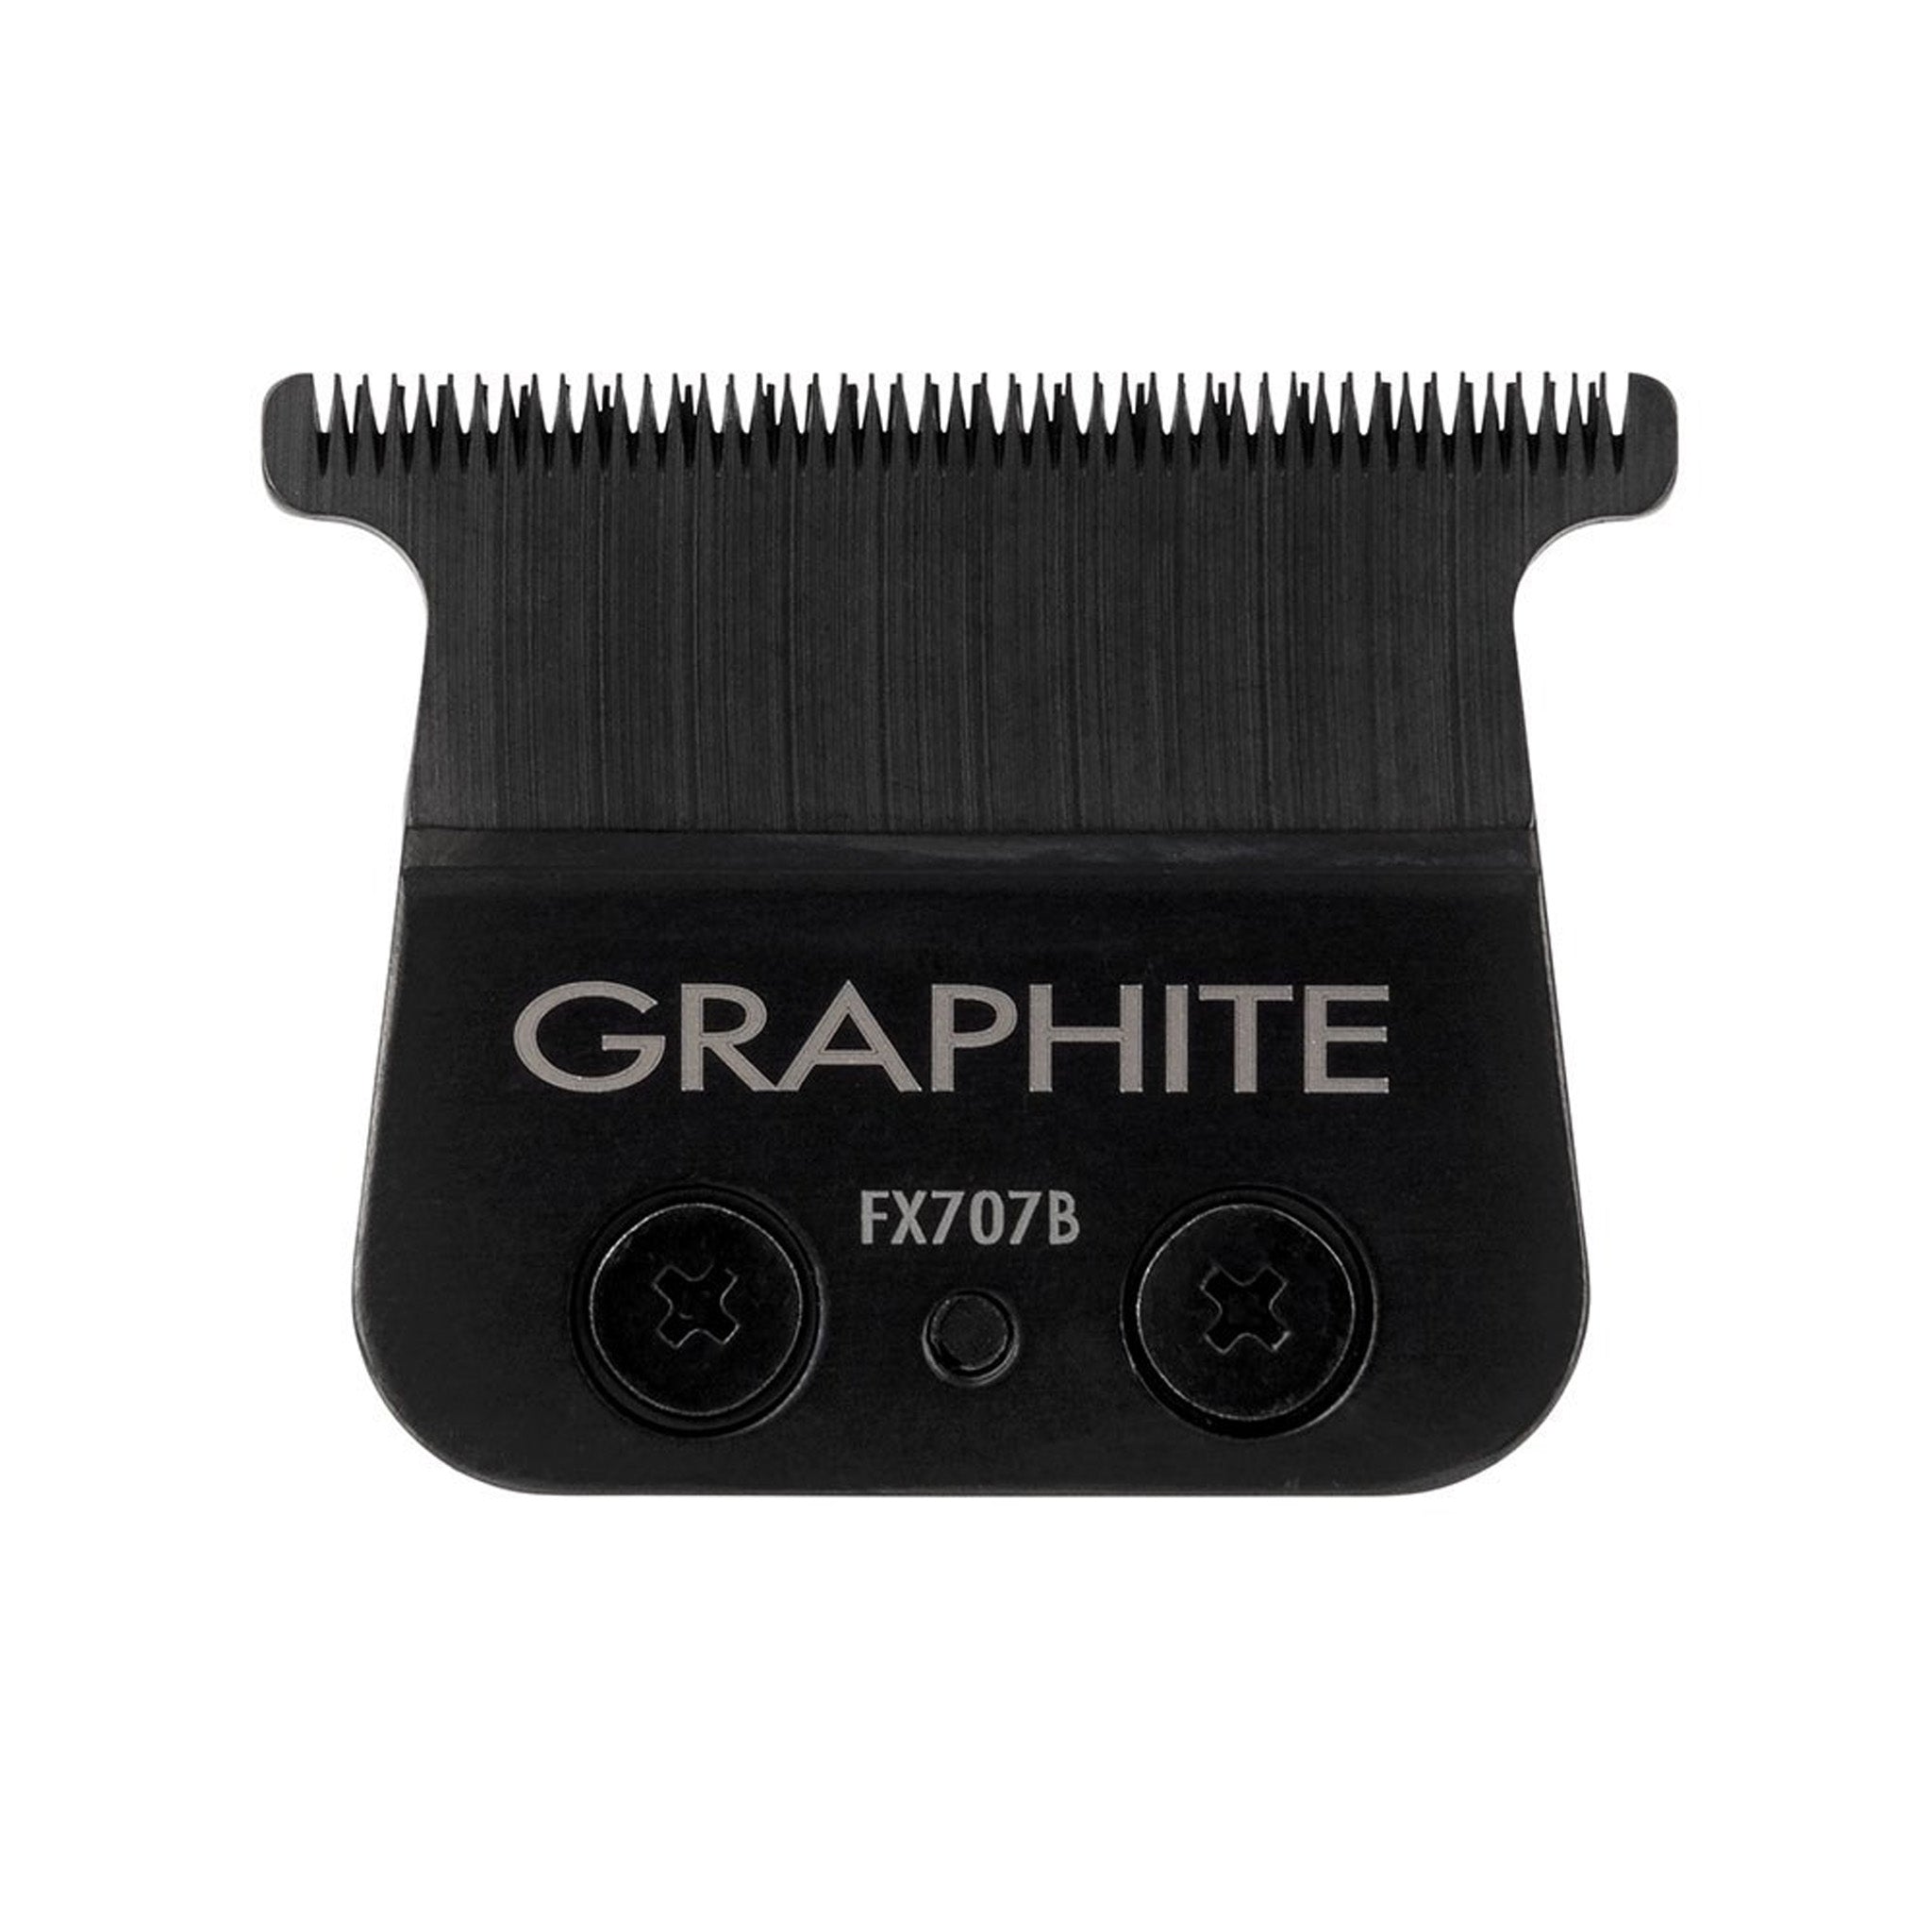 Replacement Outliner Hair Trimmer Blade Graphite FX707B